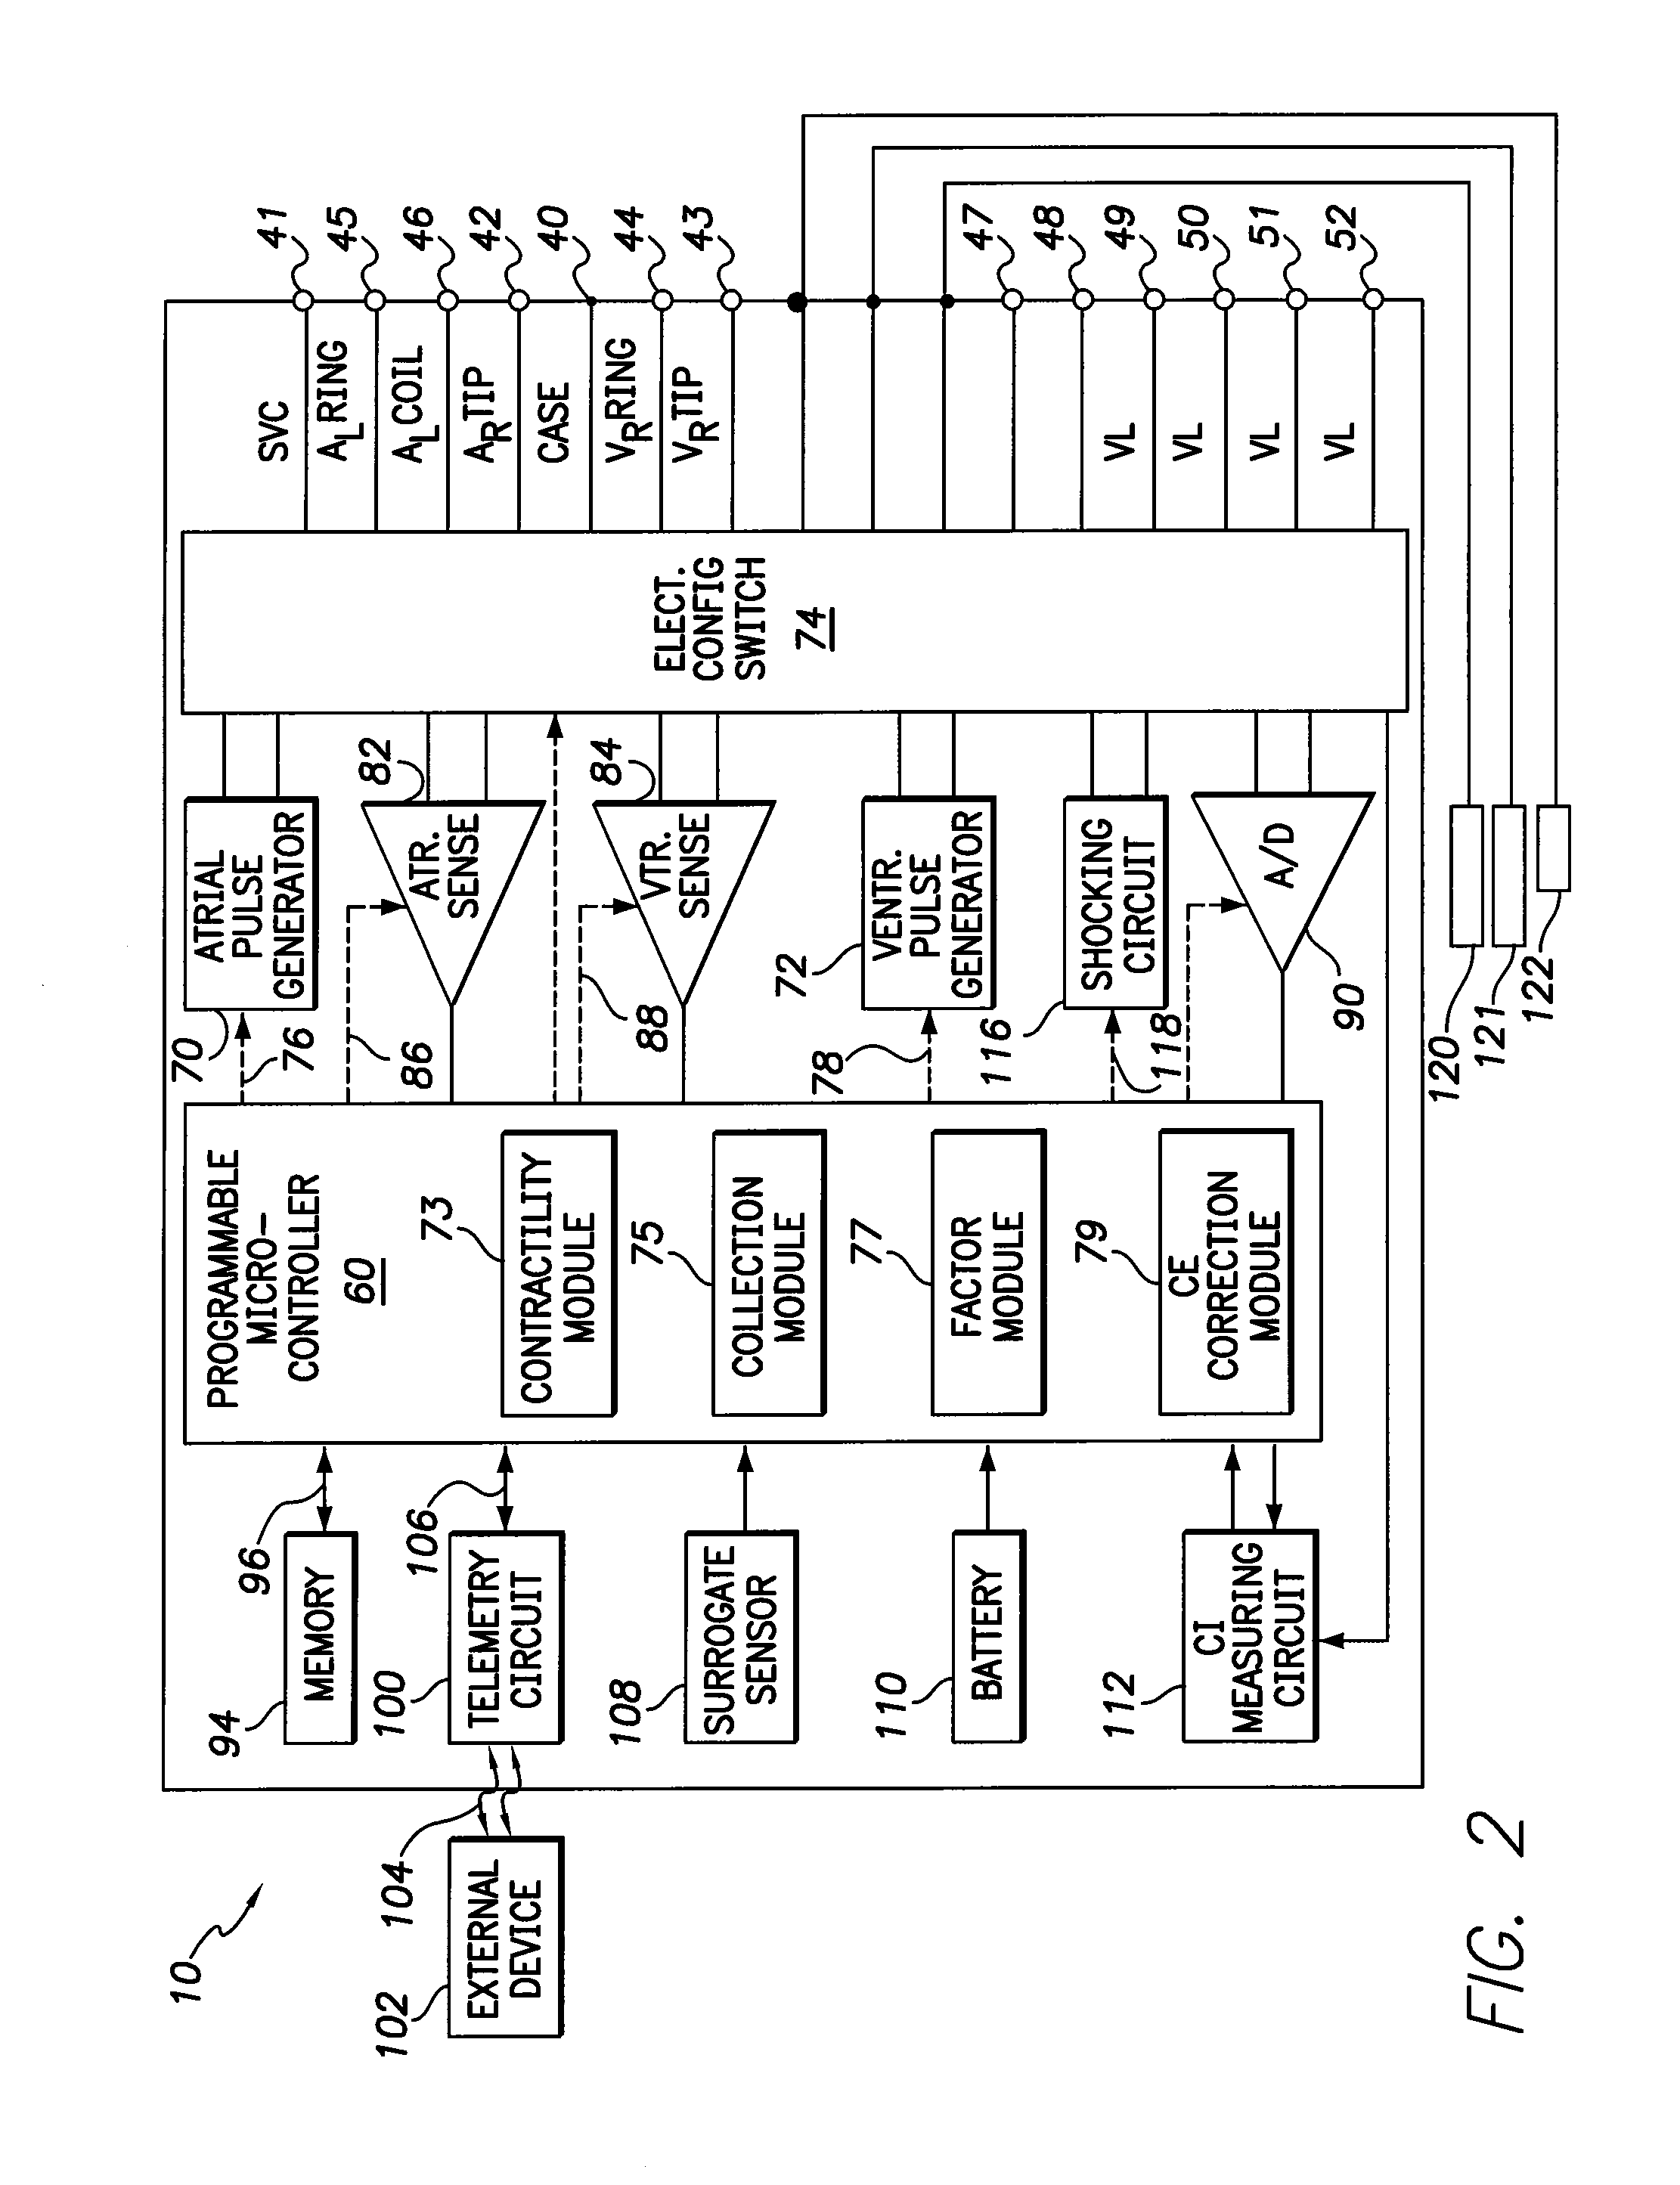 Method and system to correct contractility based on non-heart failure factors